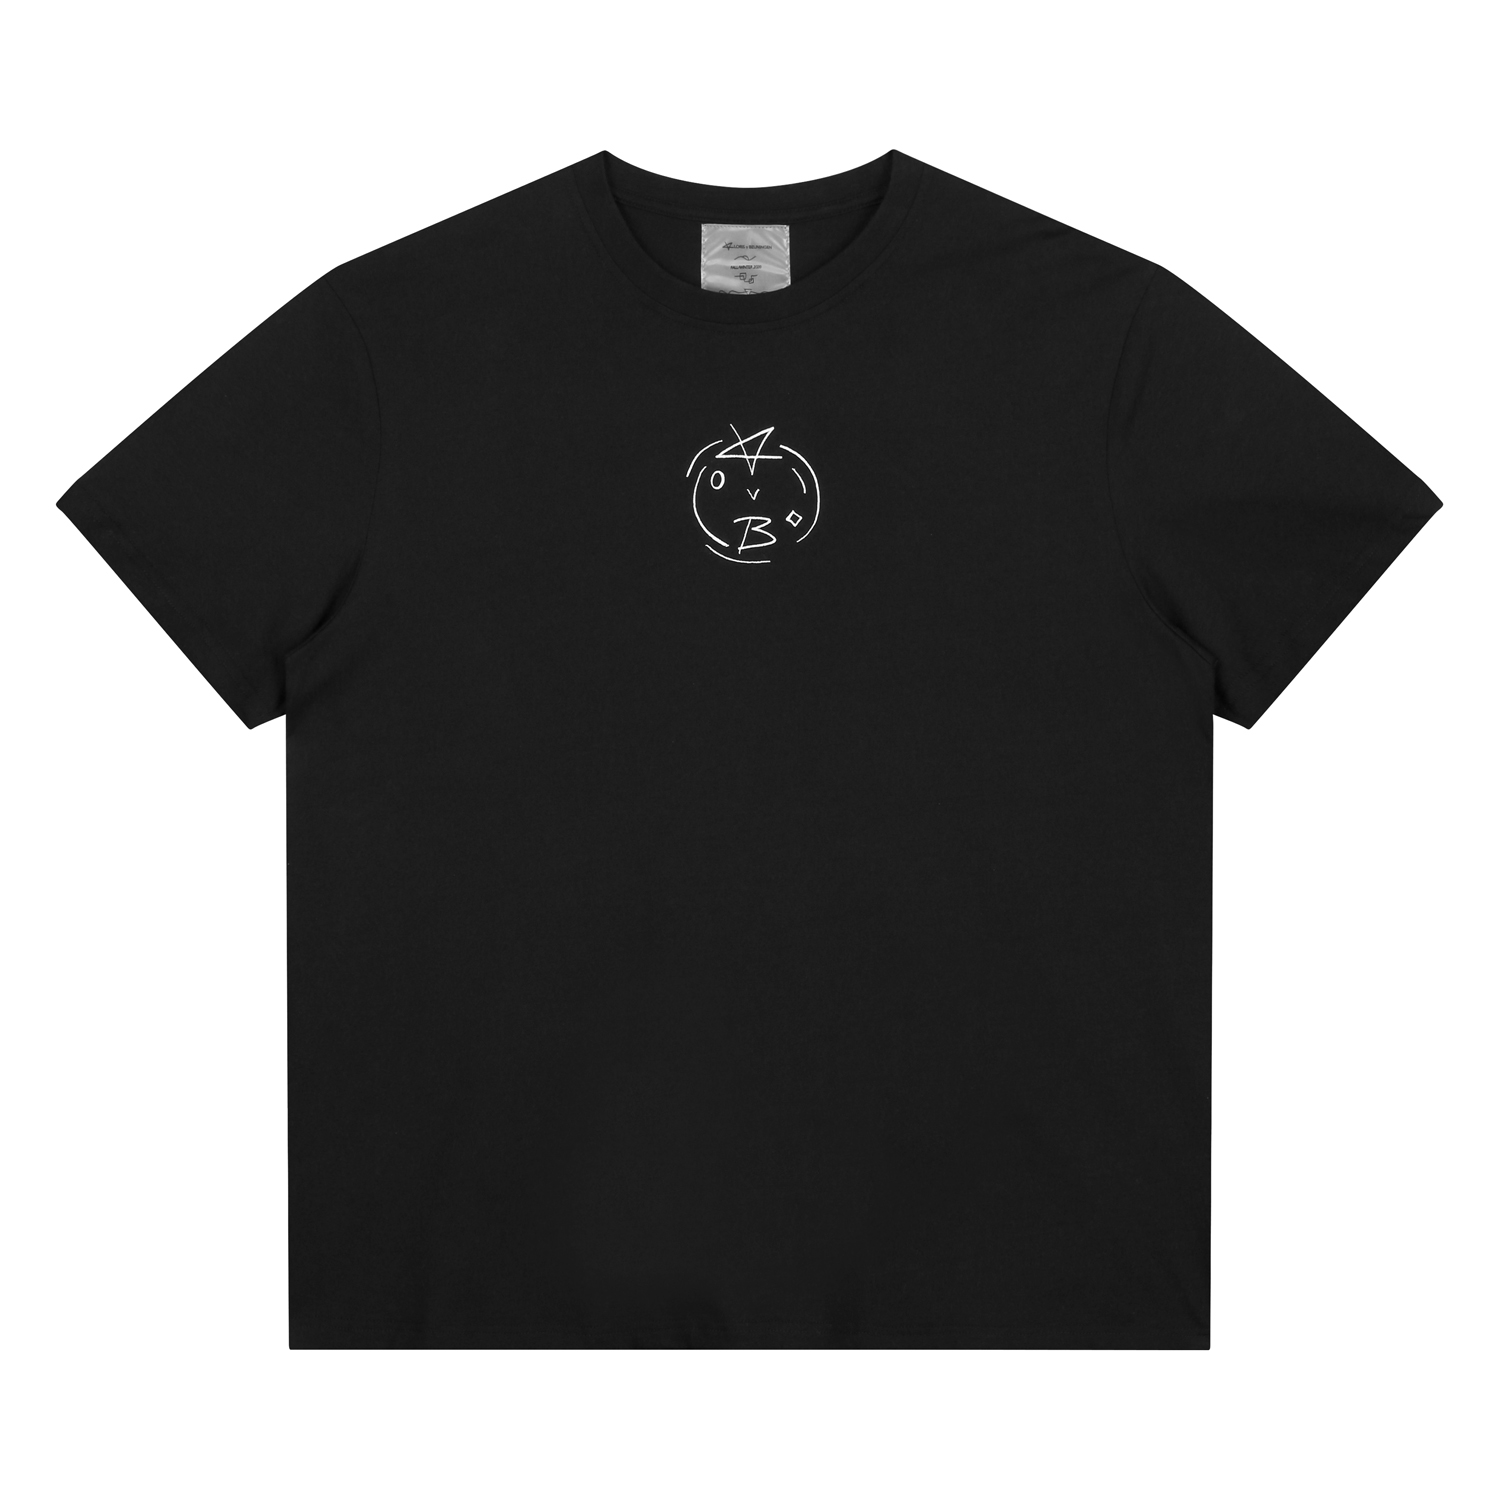 T-SHRIT - BLOSSOMING OF EXISTENCE - Black Edition | Shop.